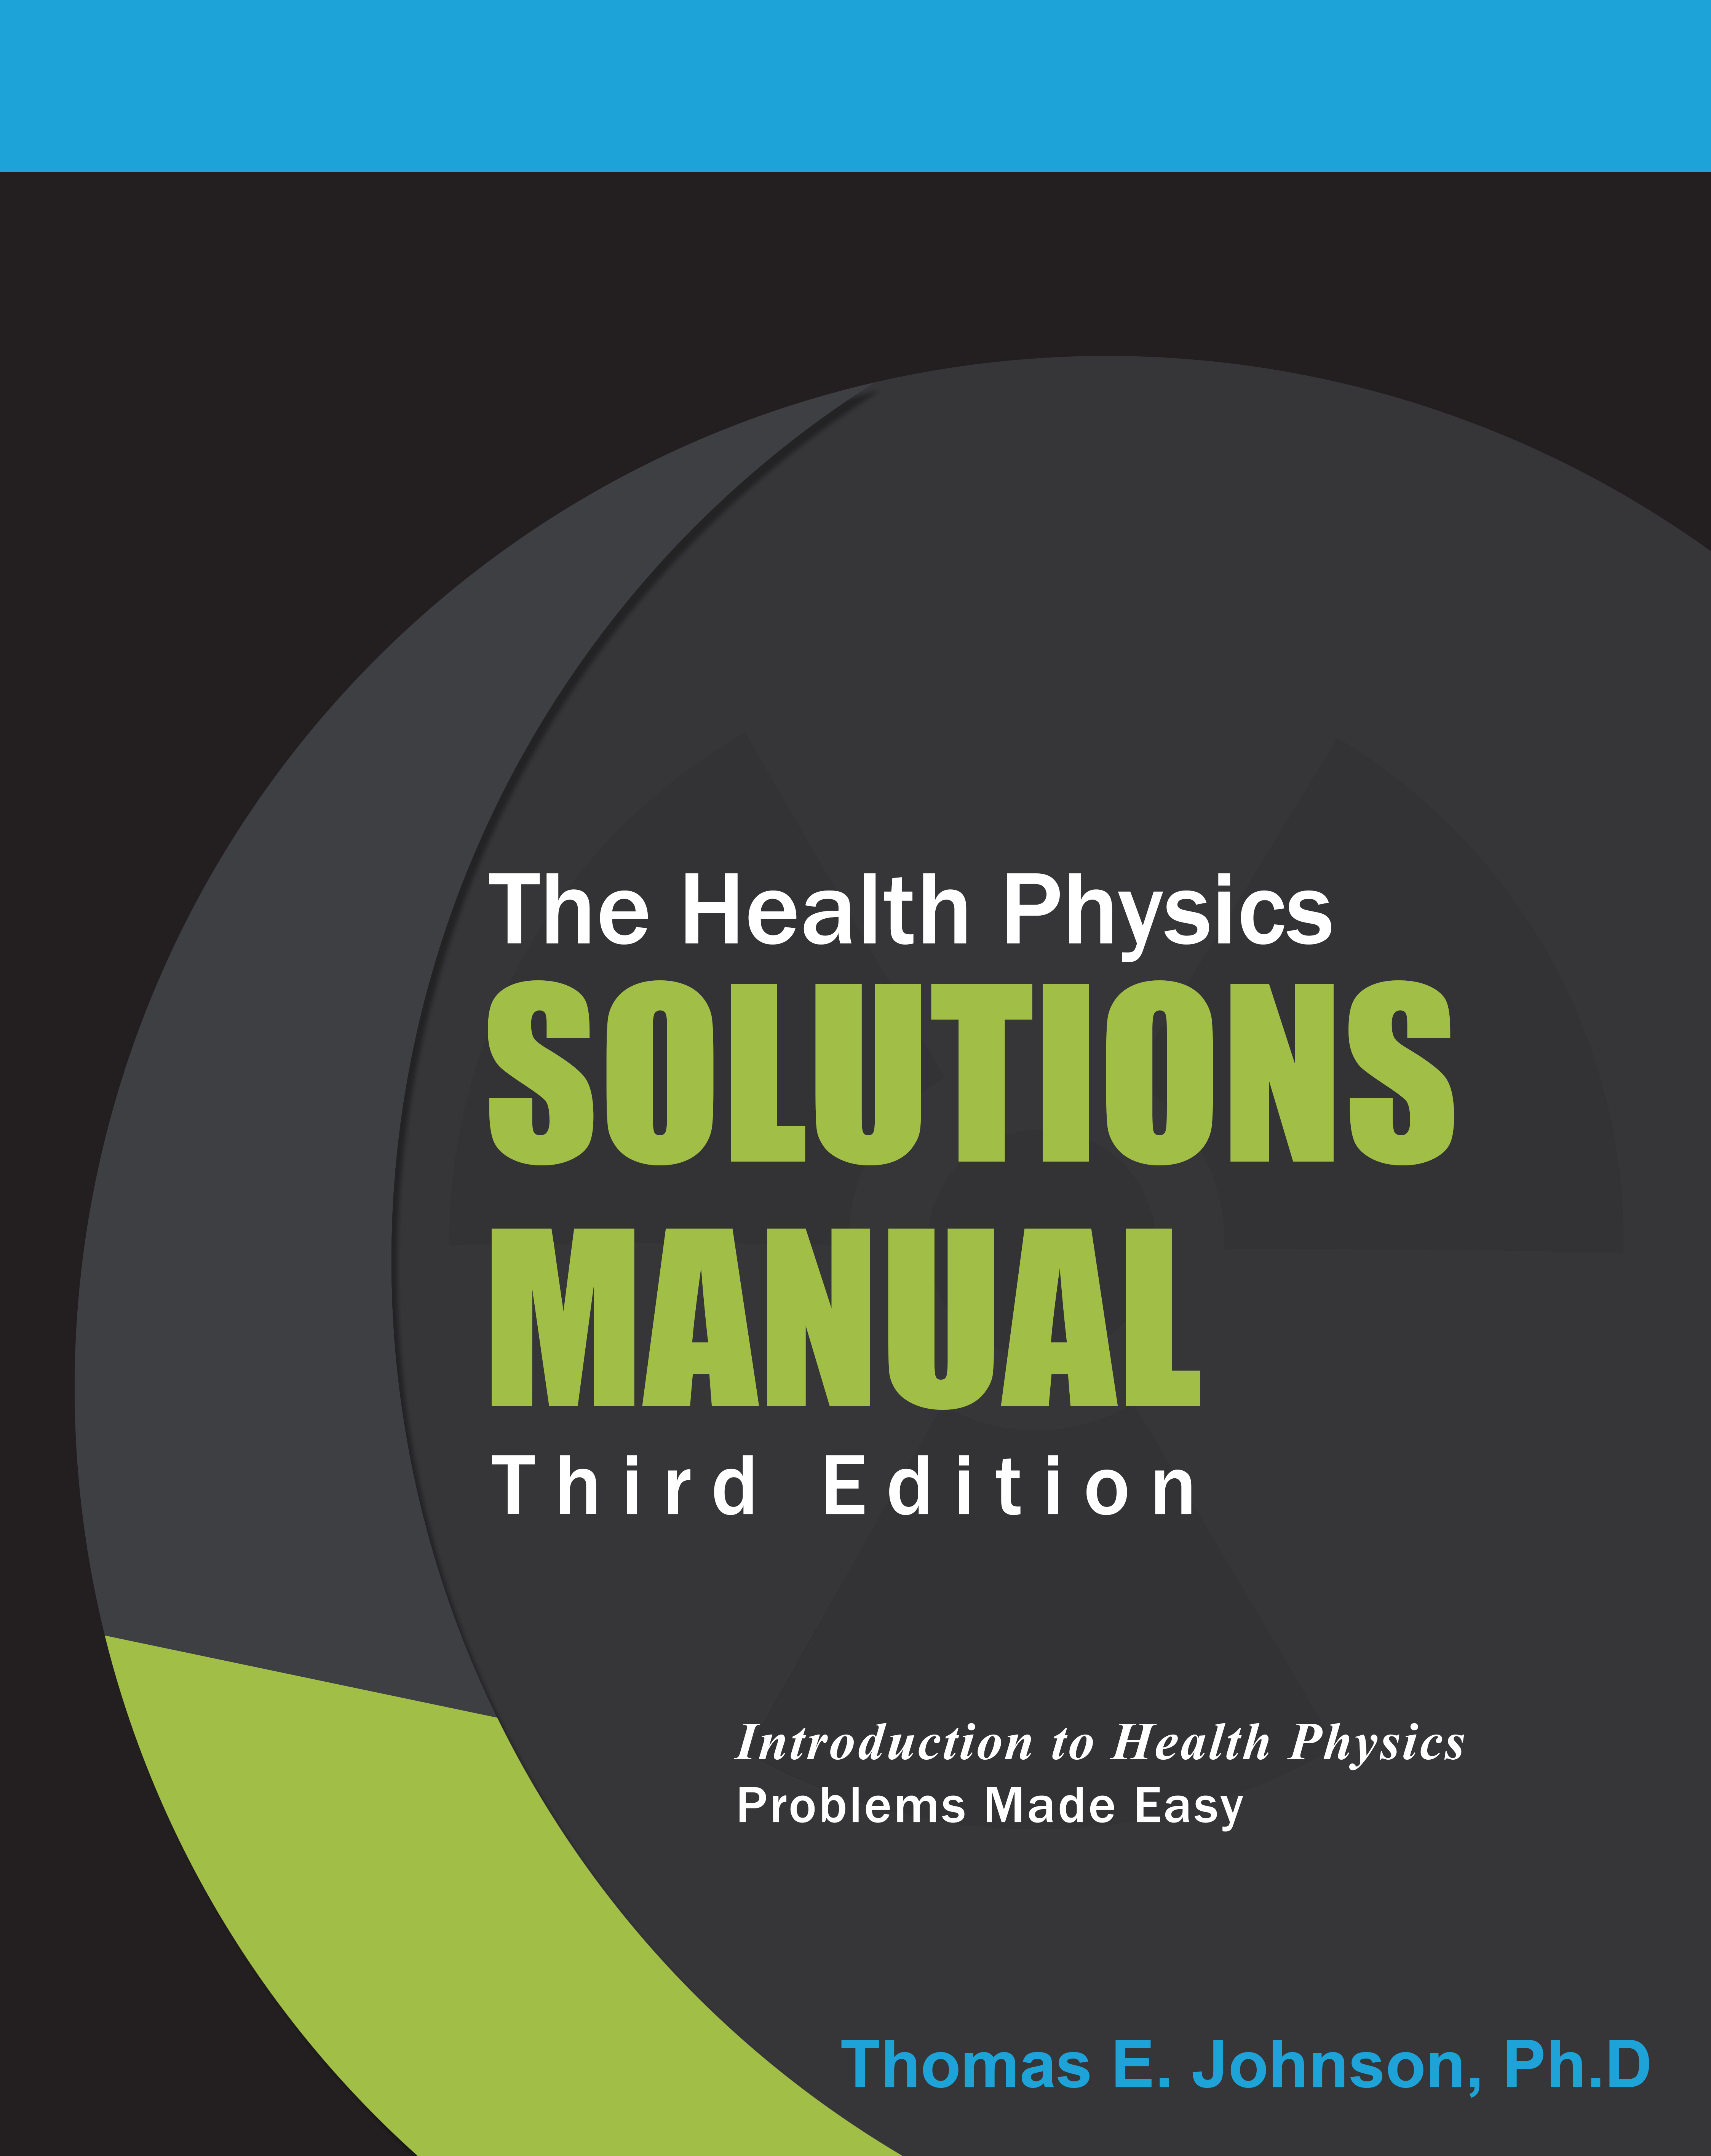 Health Physics Solutions Manual Third
Edition Cover